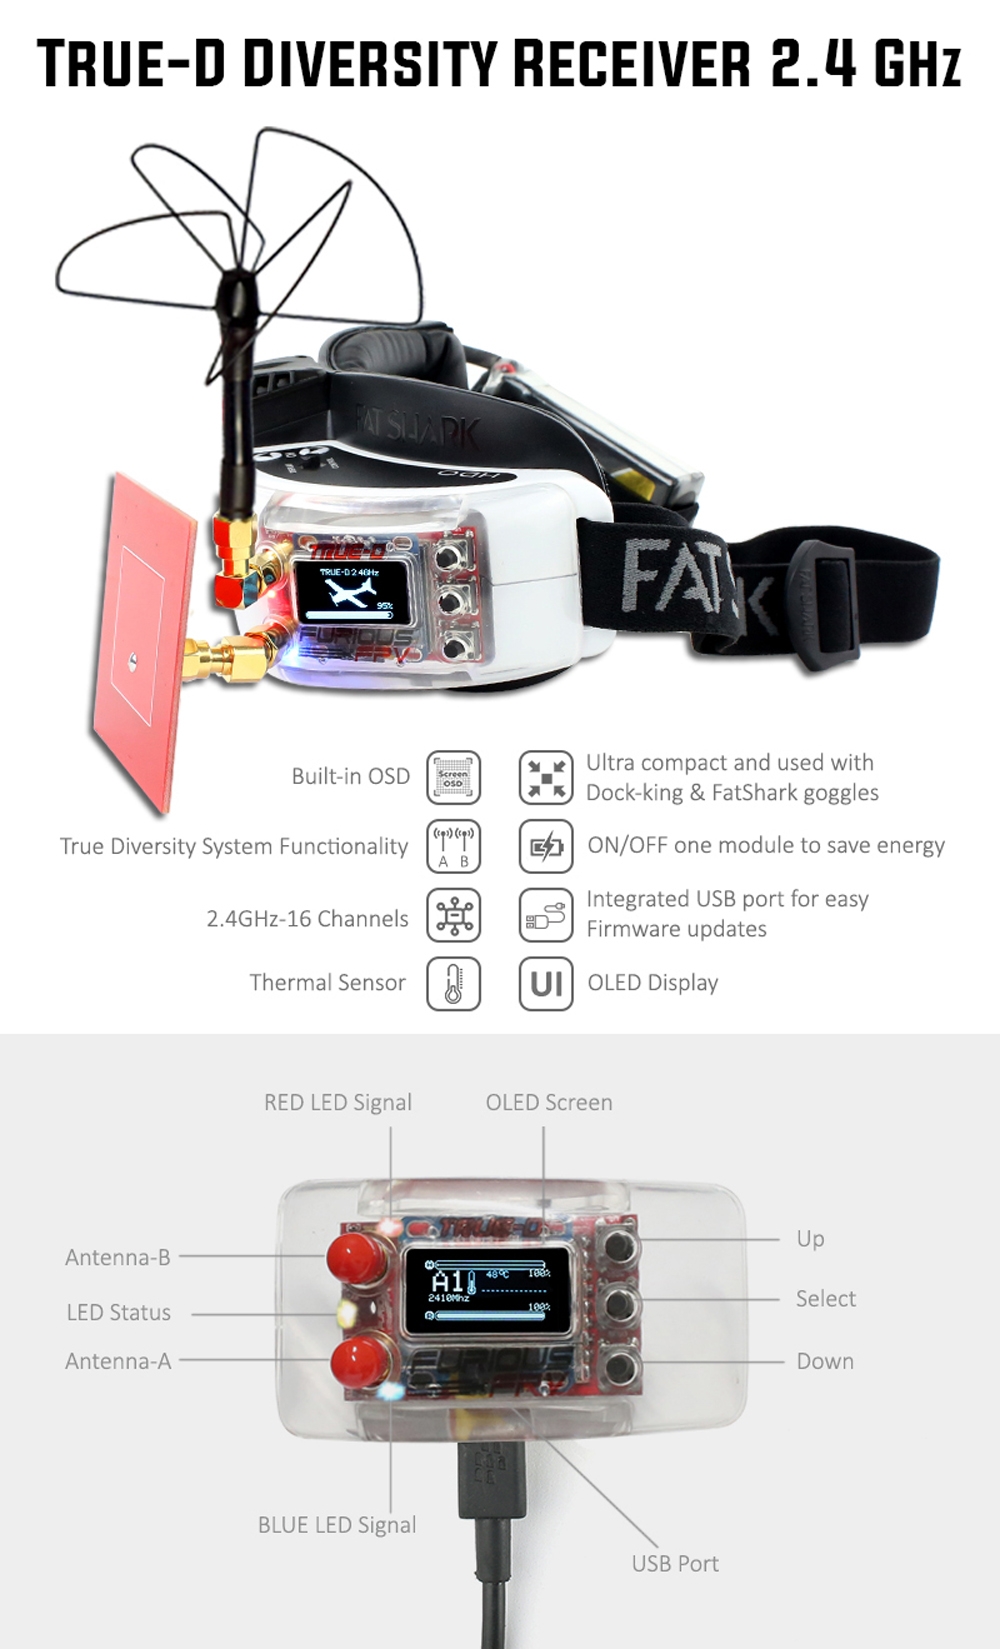 Furious True-D 2.4 GHz Diversity Receiver System Clarity Redefined for Fatshark Goggles